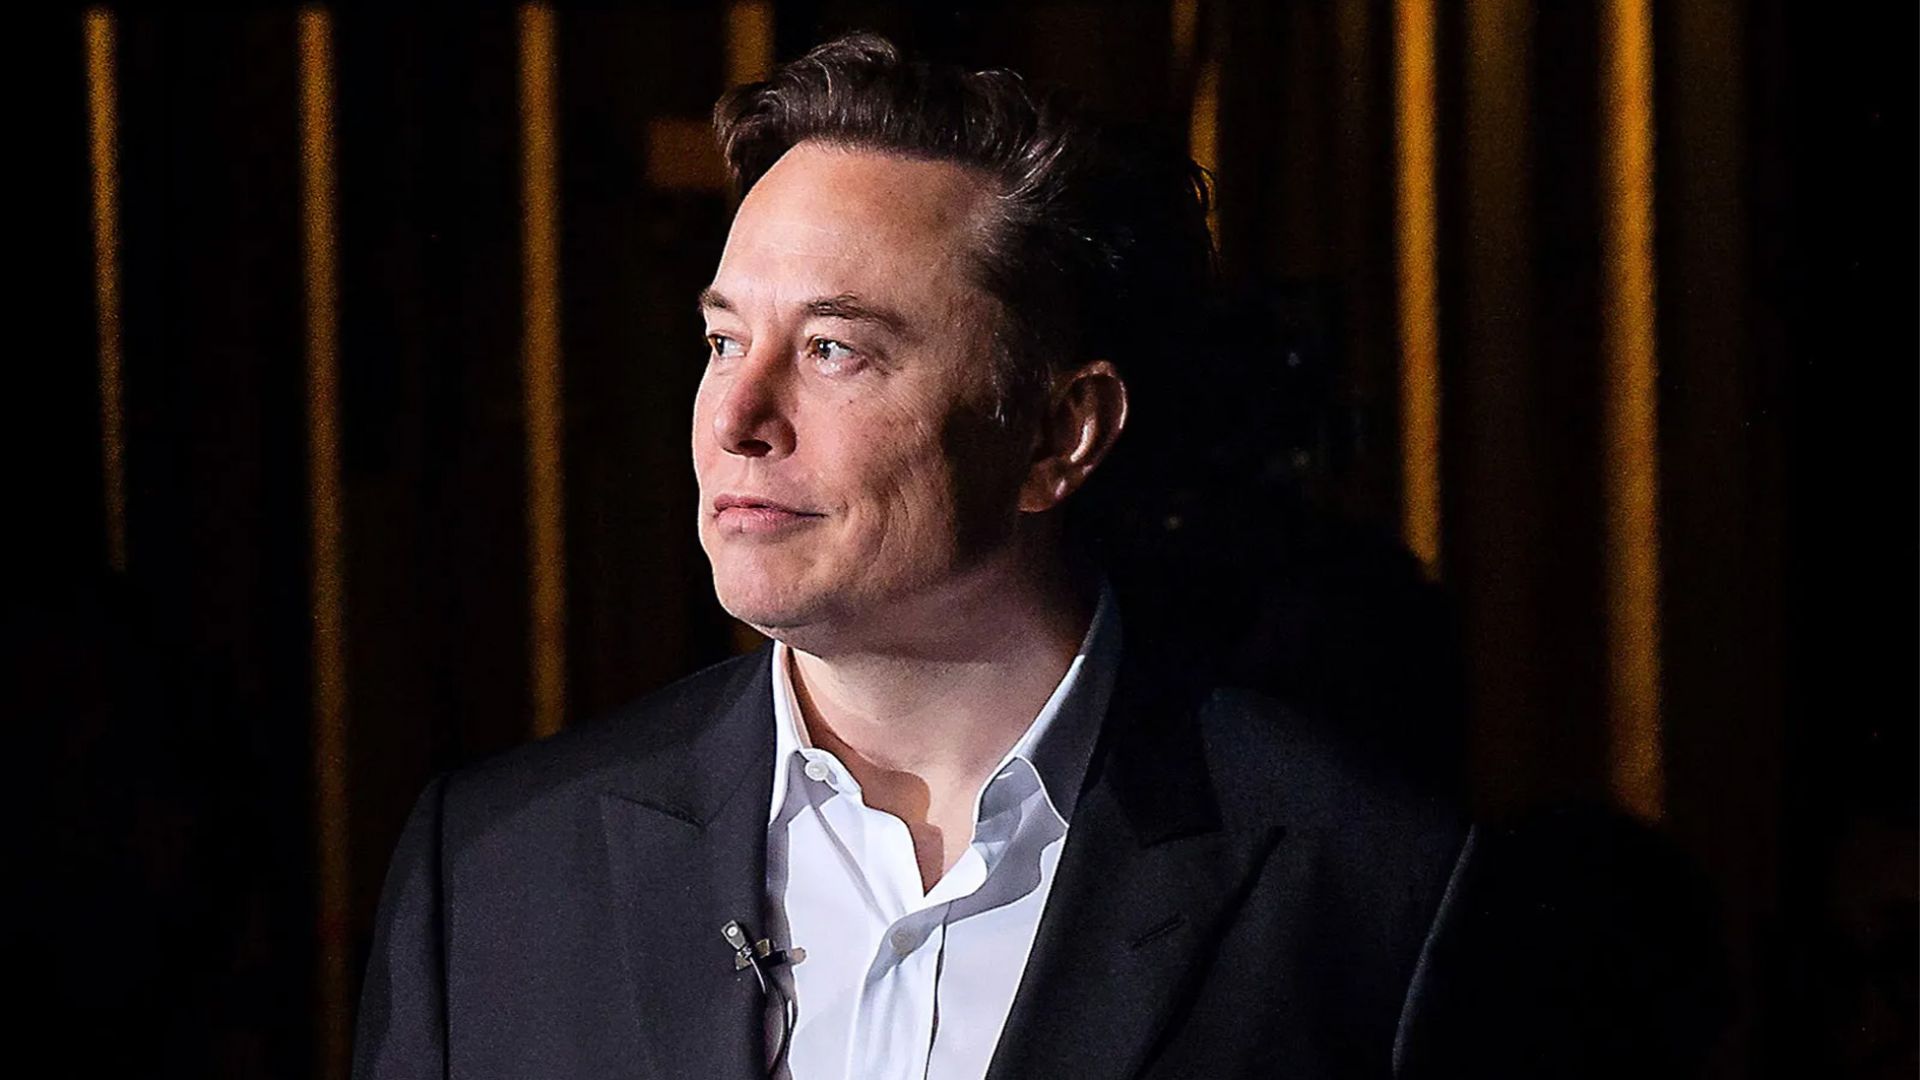 Elon Musk called fiat currency a scam